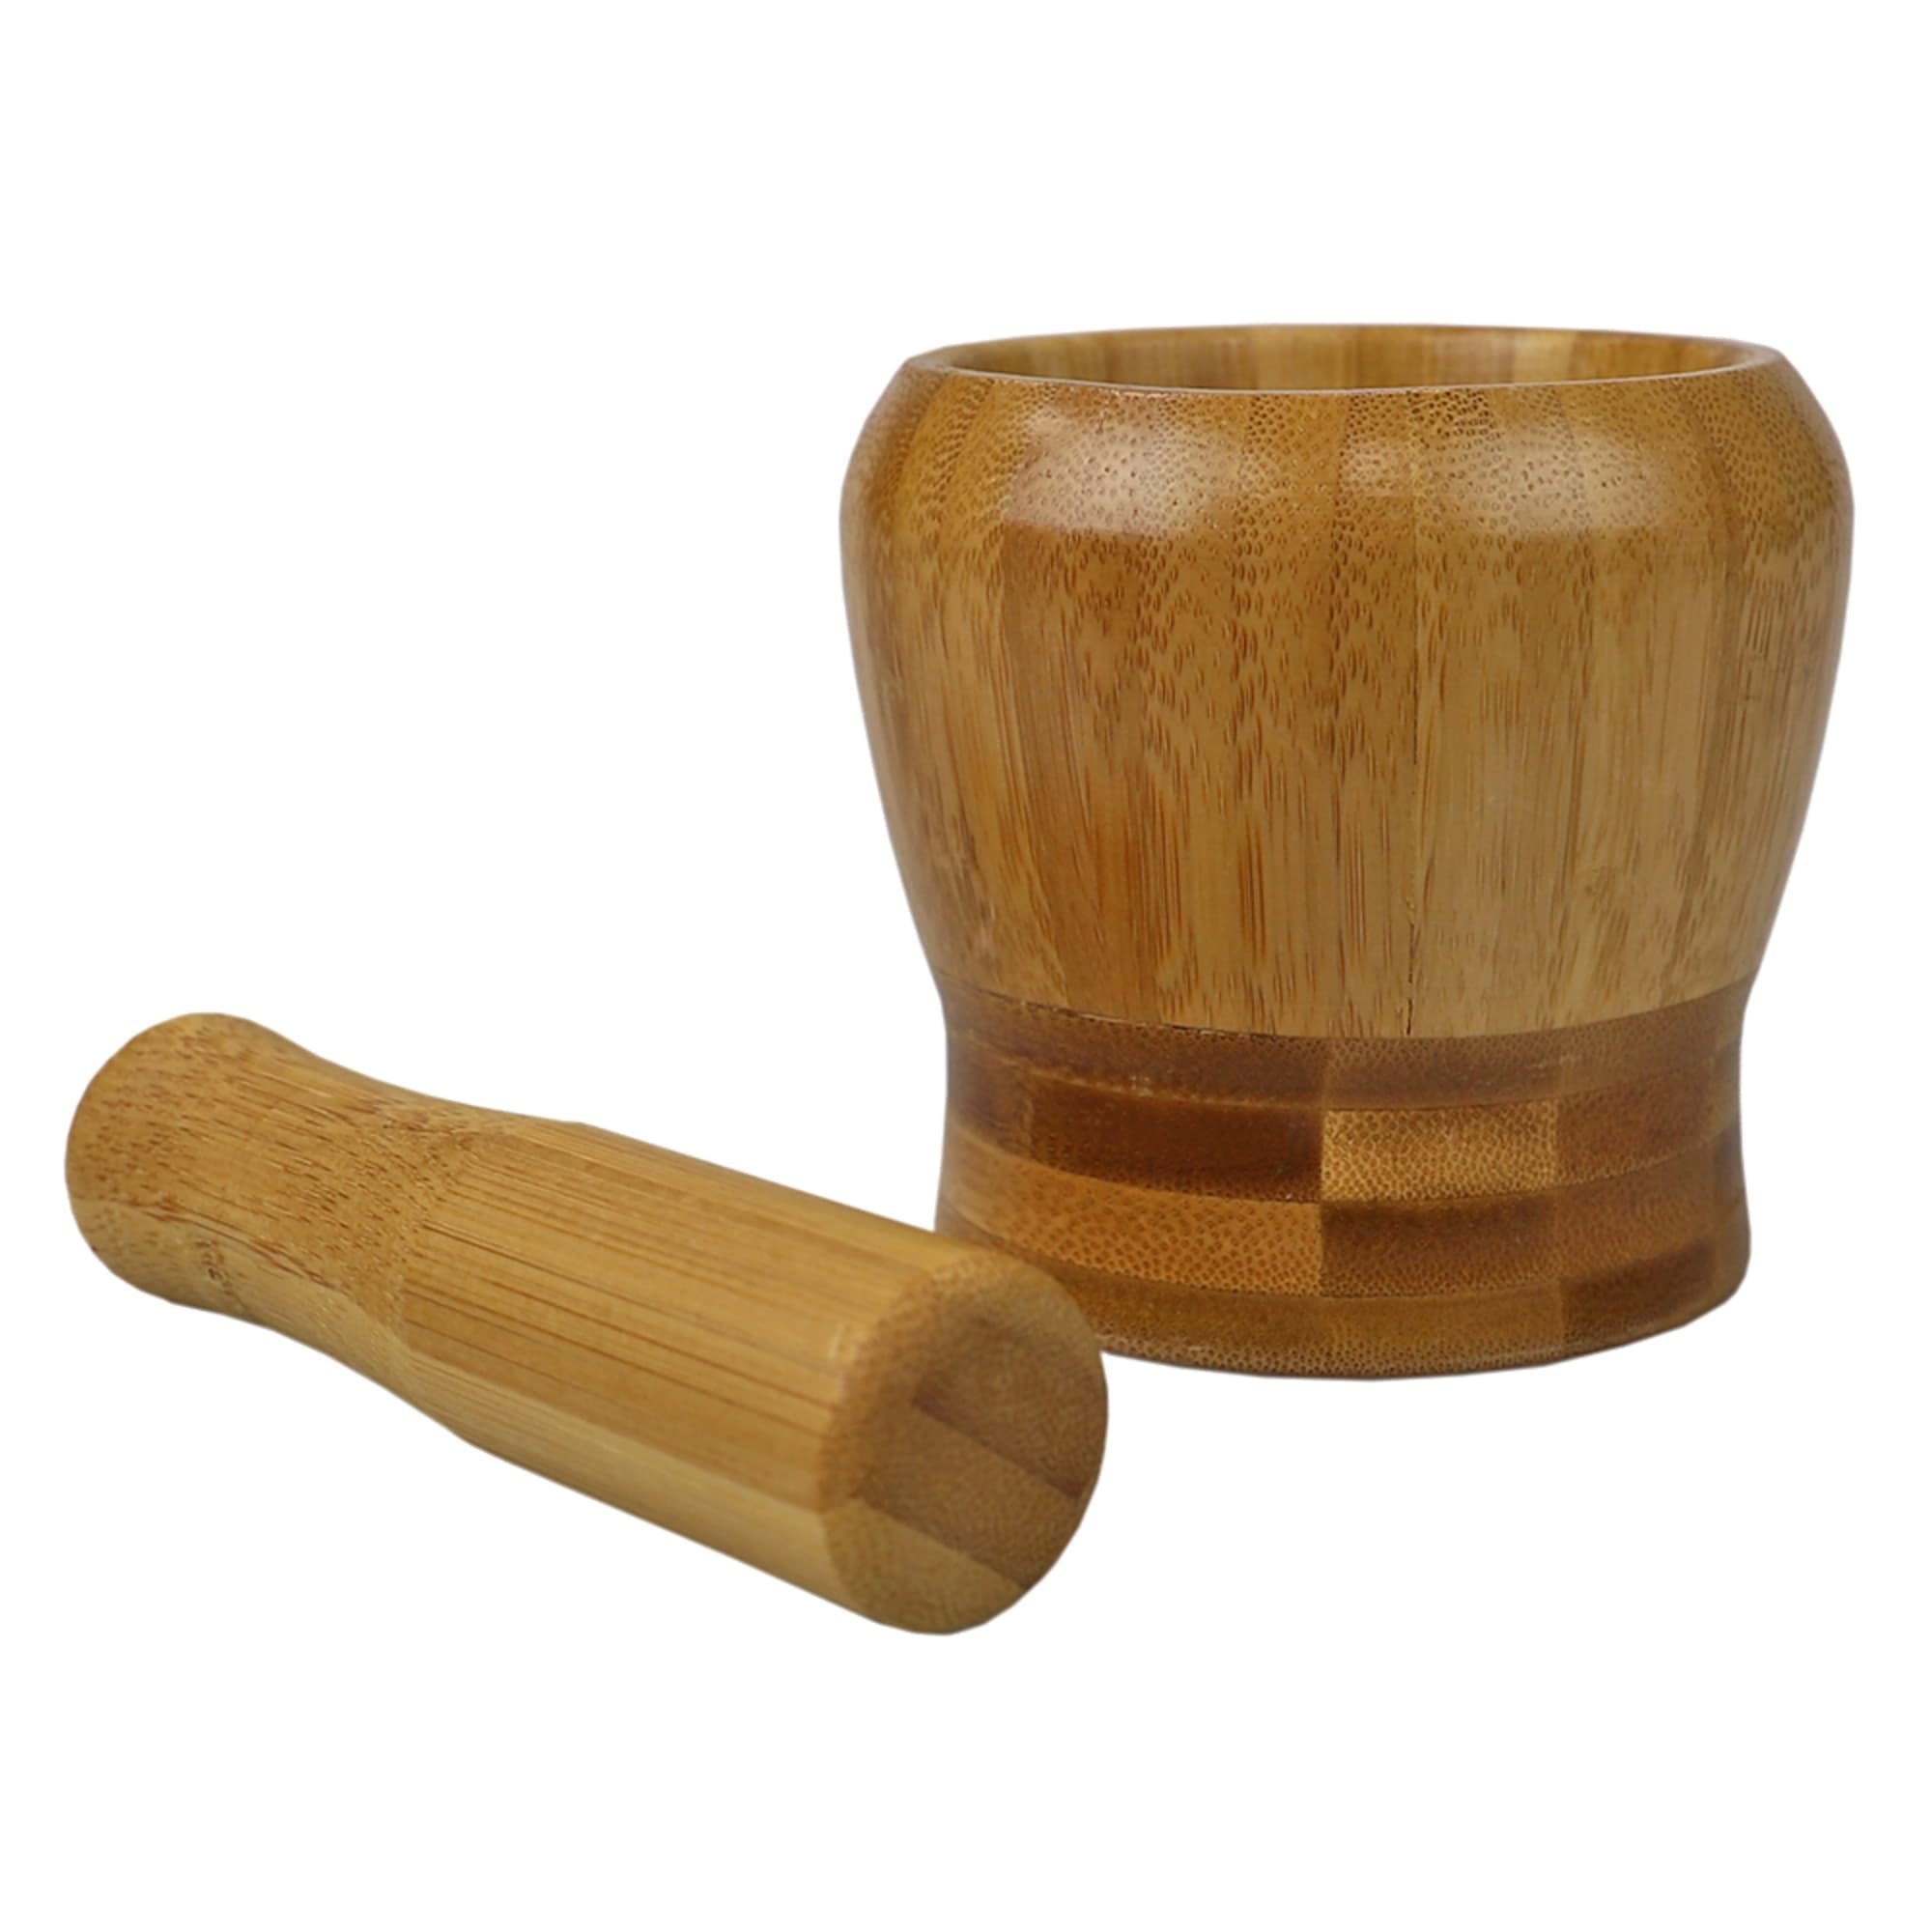 Home Basics Non-Skid Rustic  No-Spill Large Bamboo Mortar and Pestle, Natural $6.50 EACH, CASE PACK OF 12